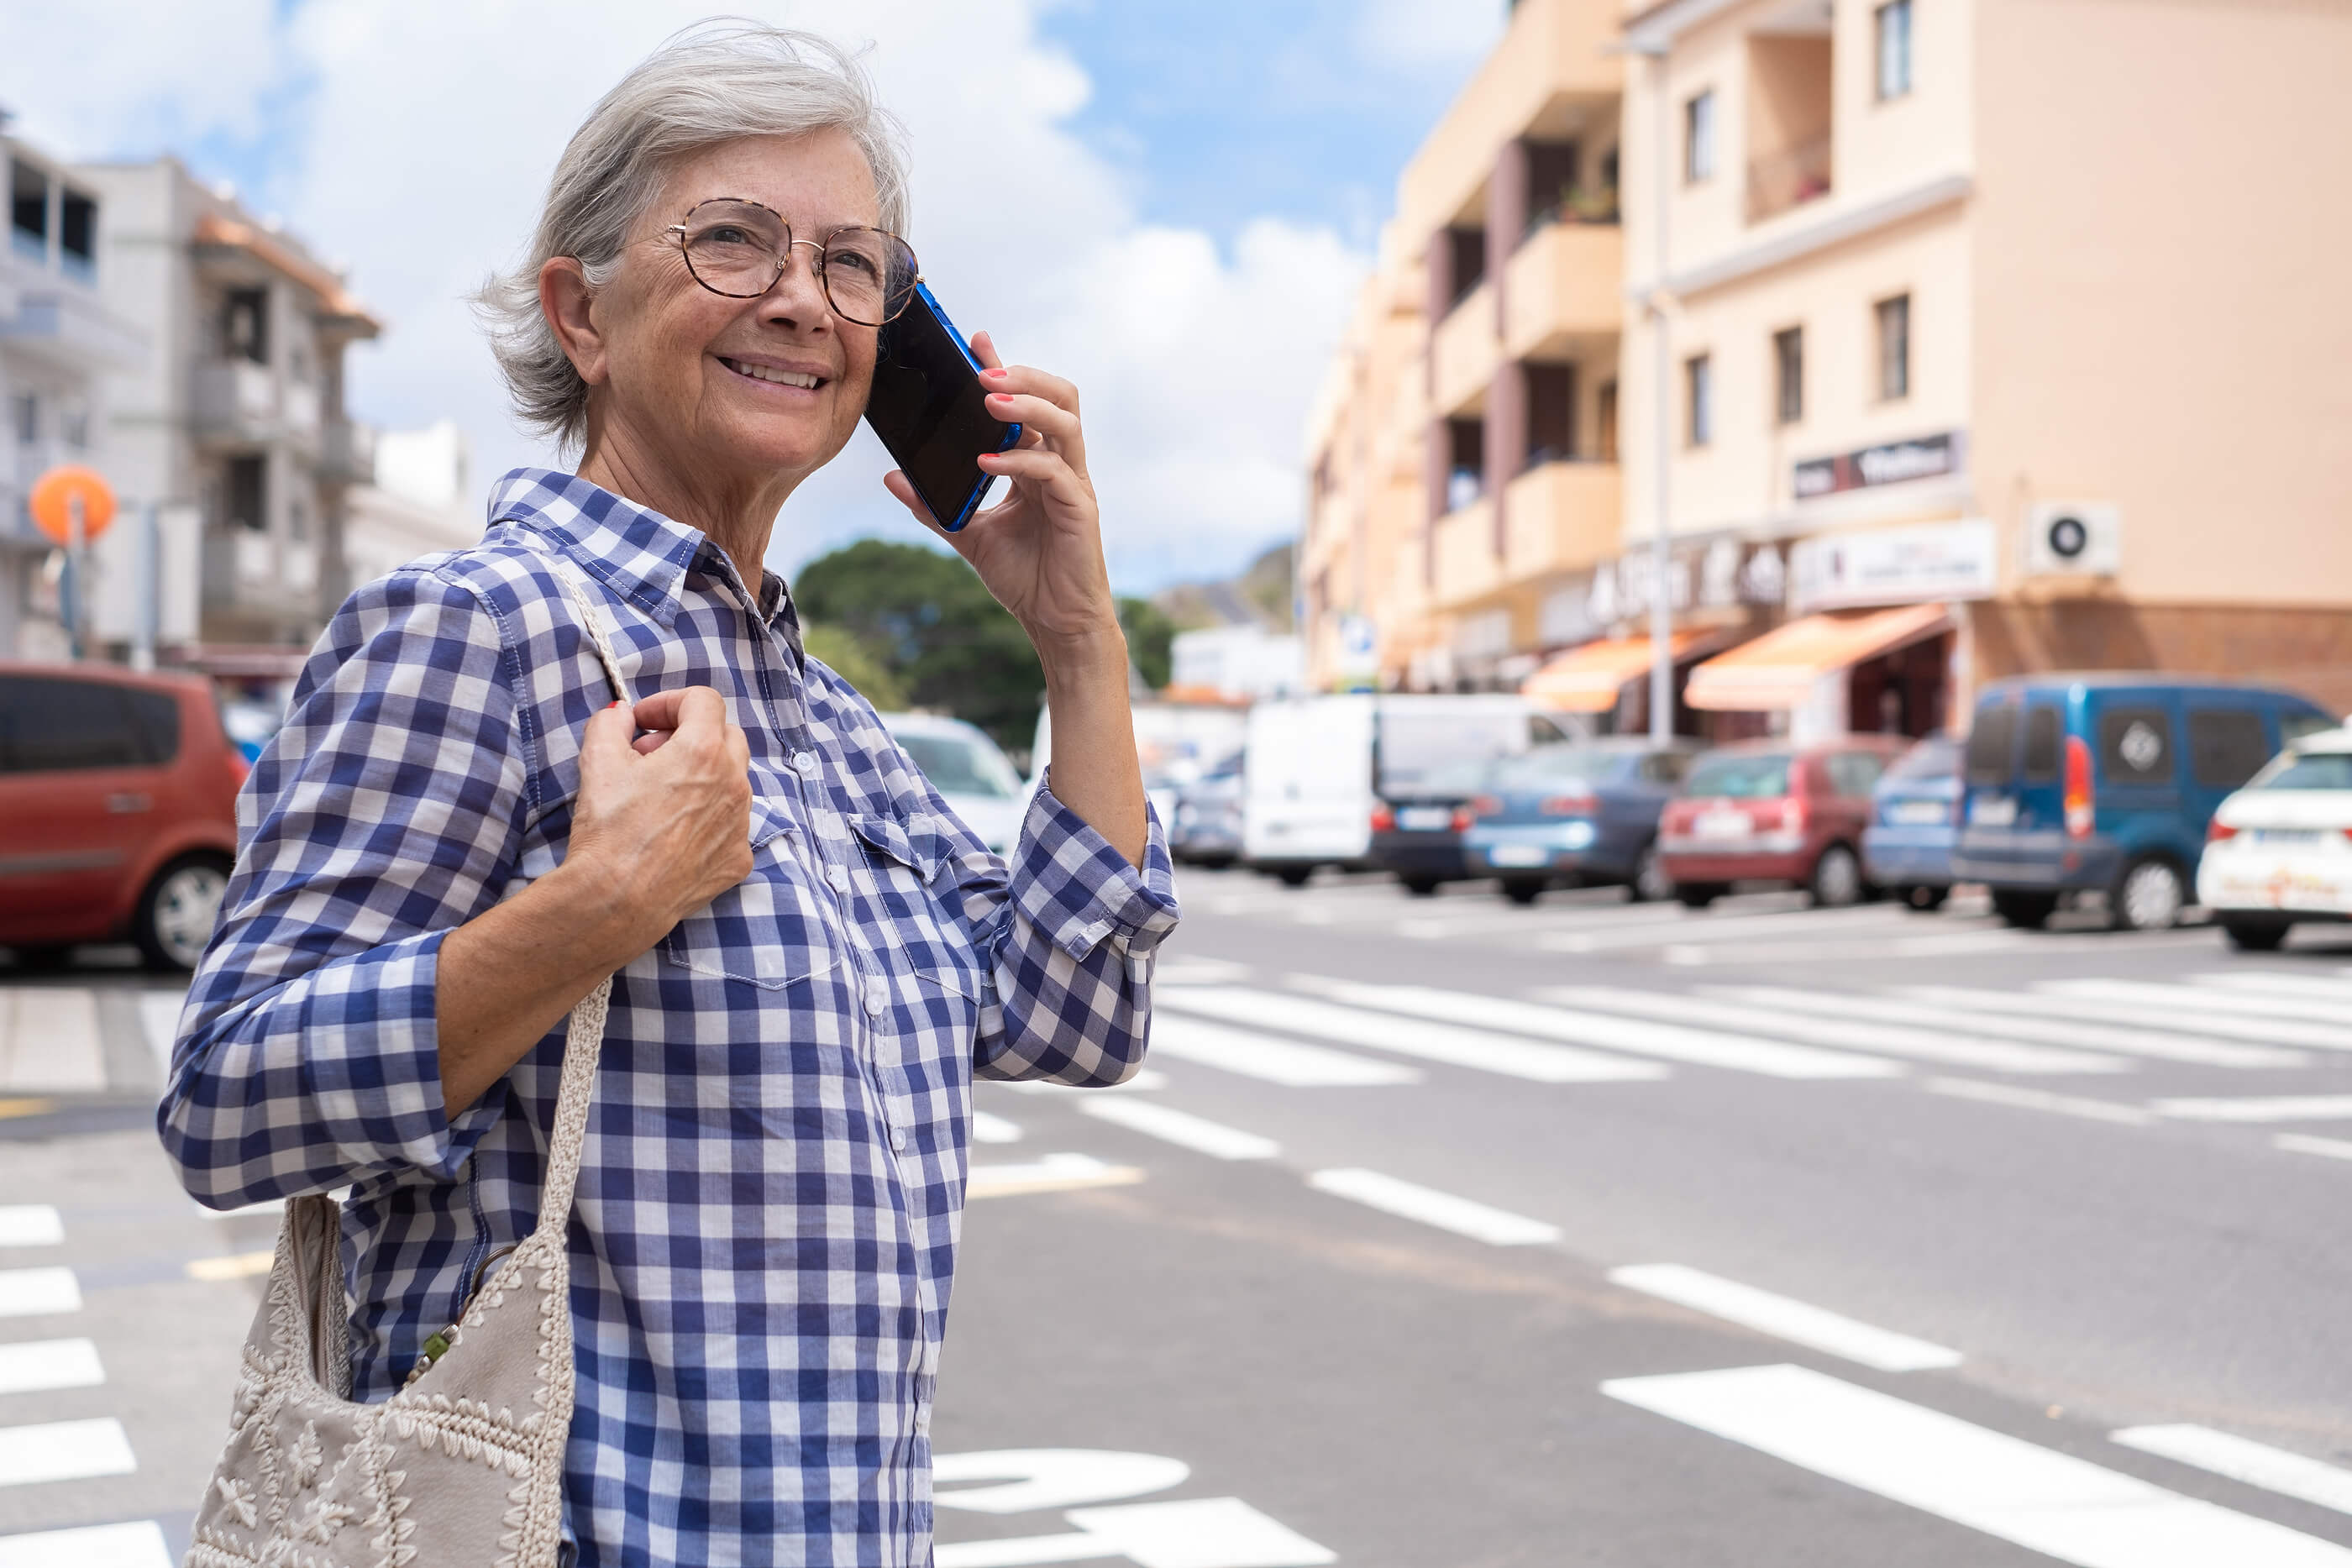 Hearing Aids Prevent Falls and Accidents